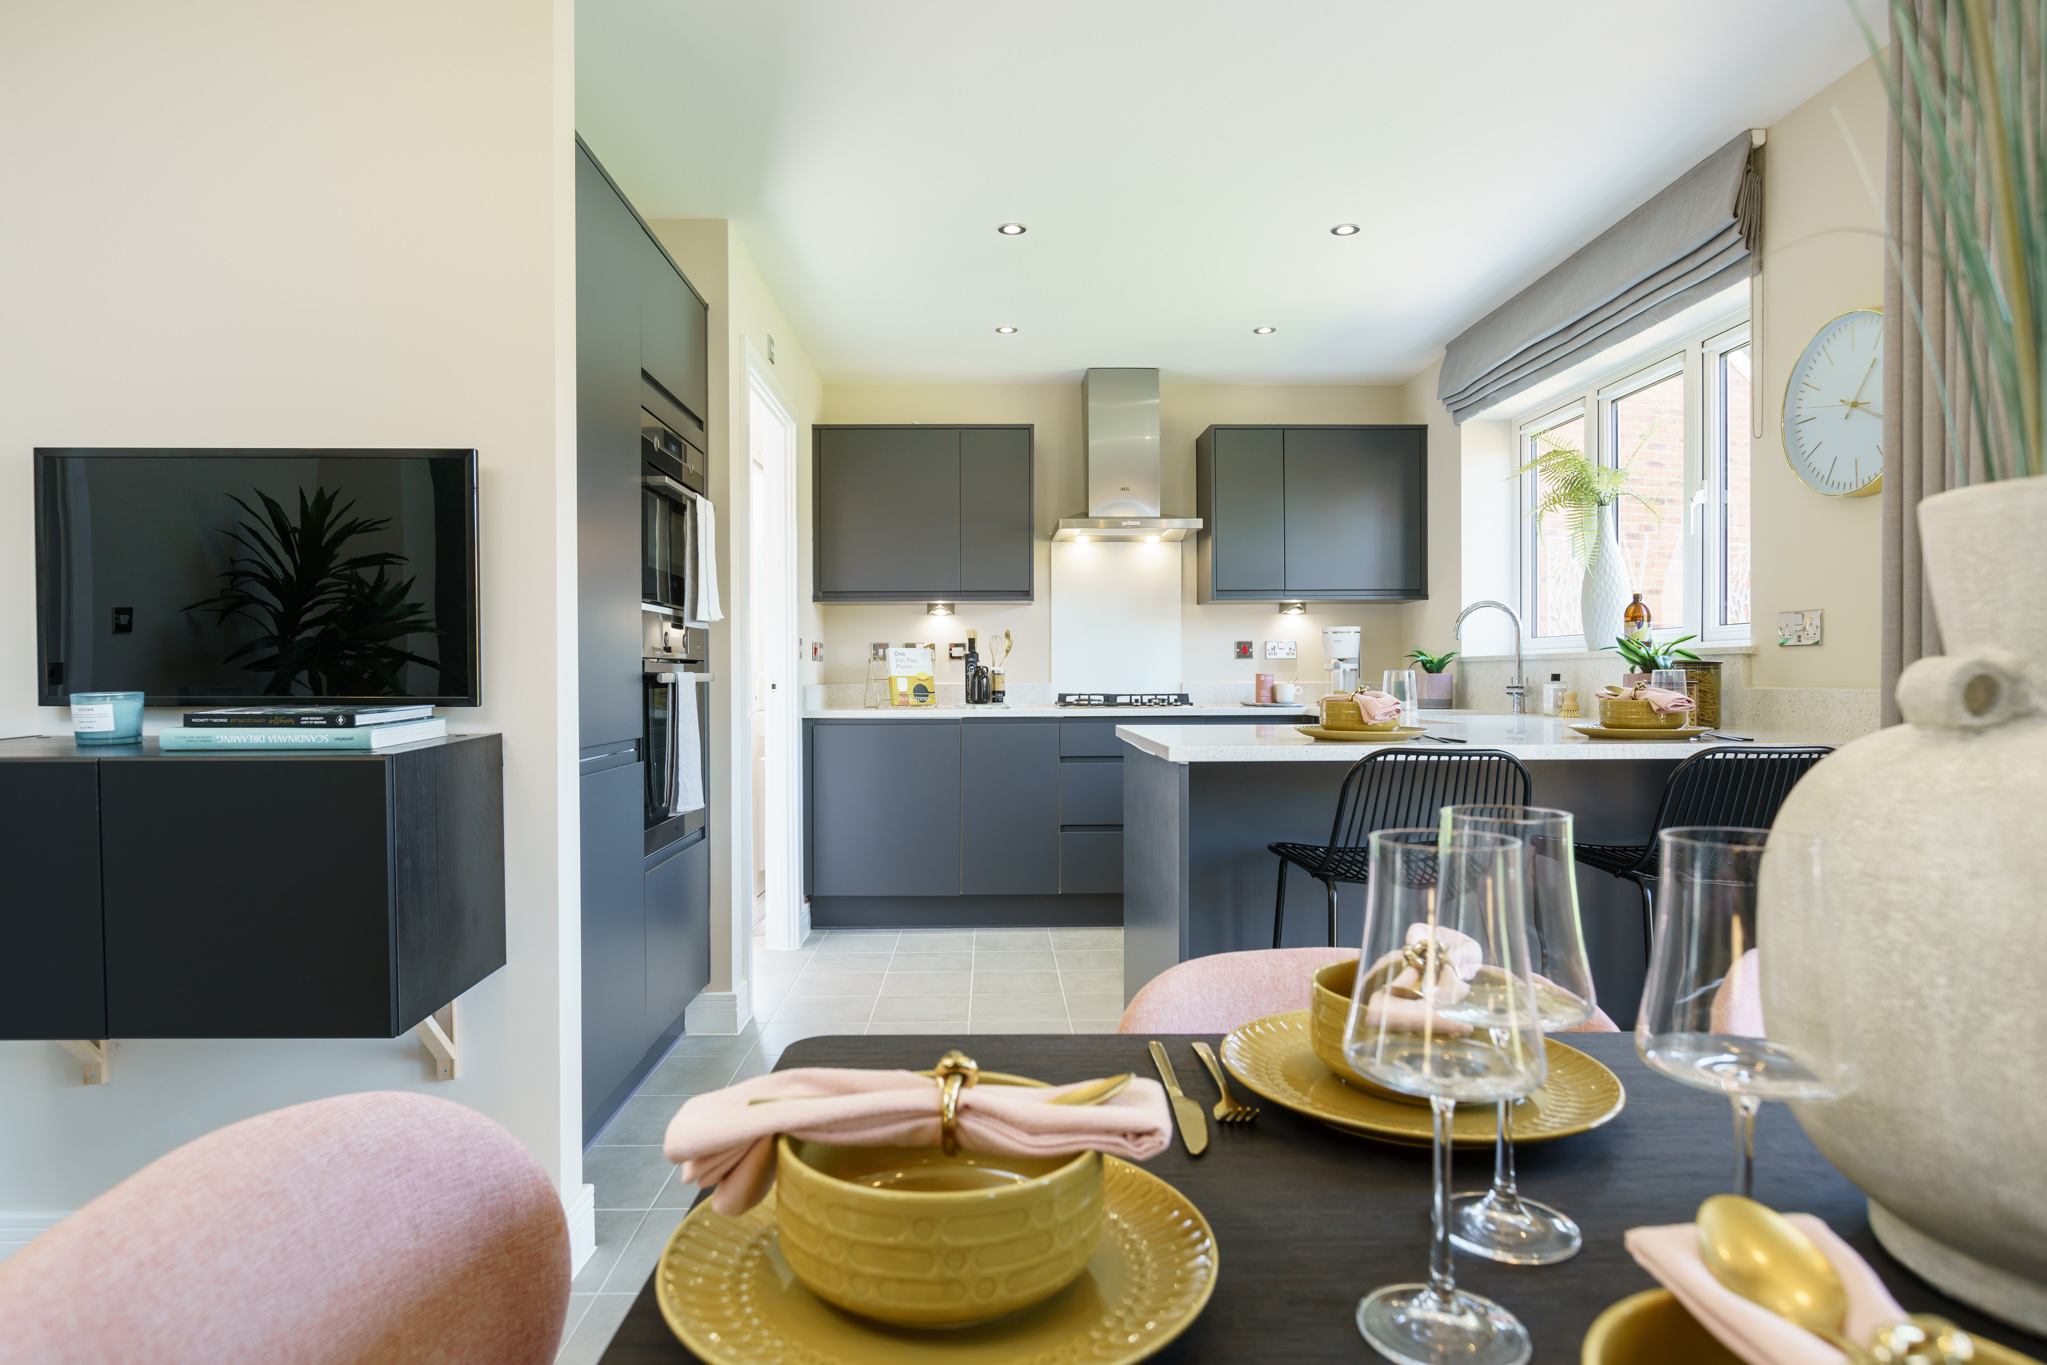 Property 1 of 11. Showhome Photography